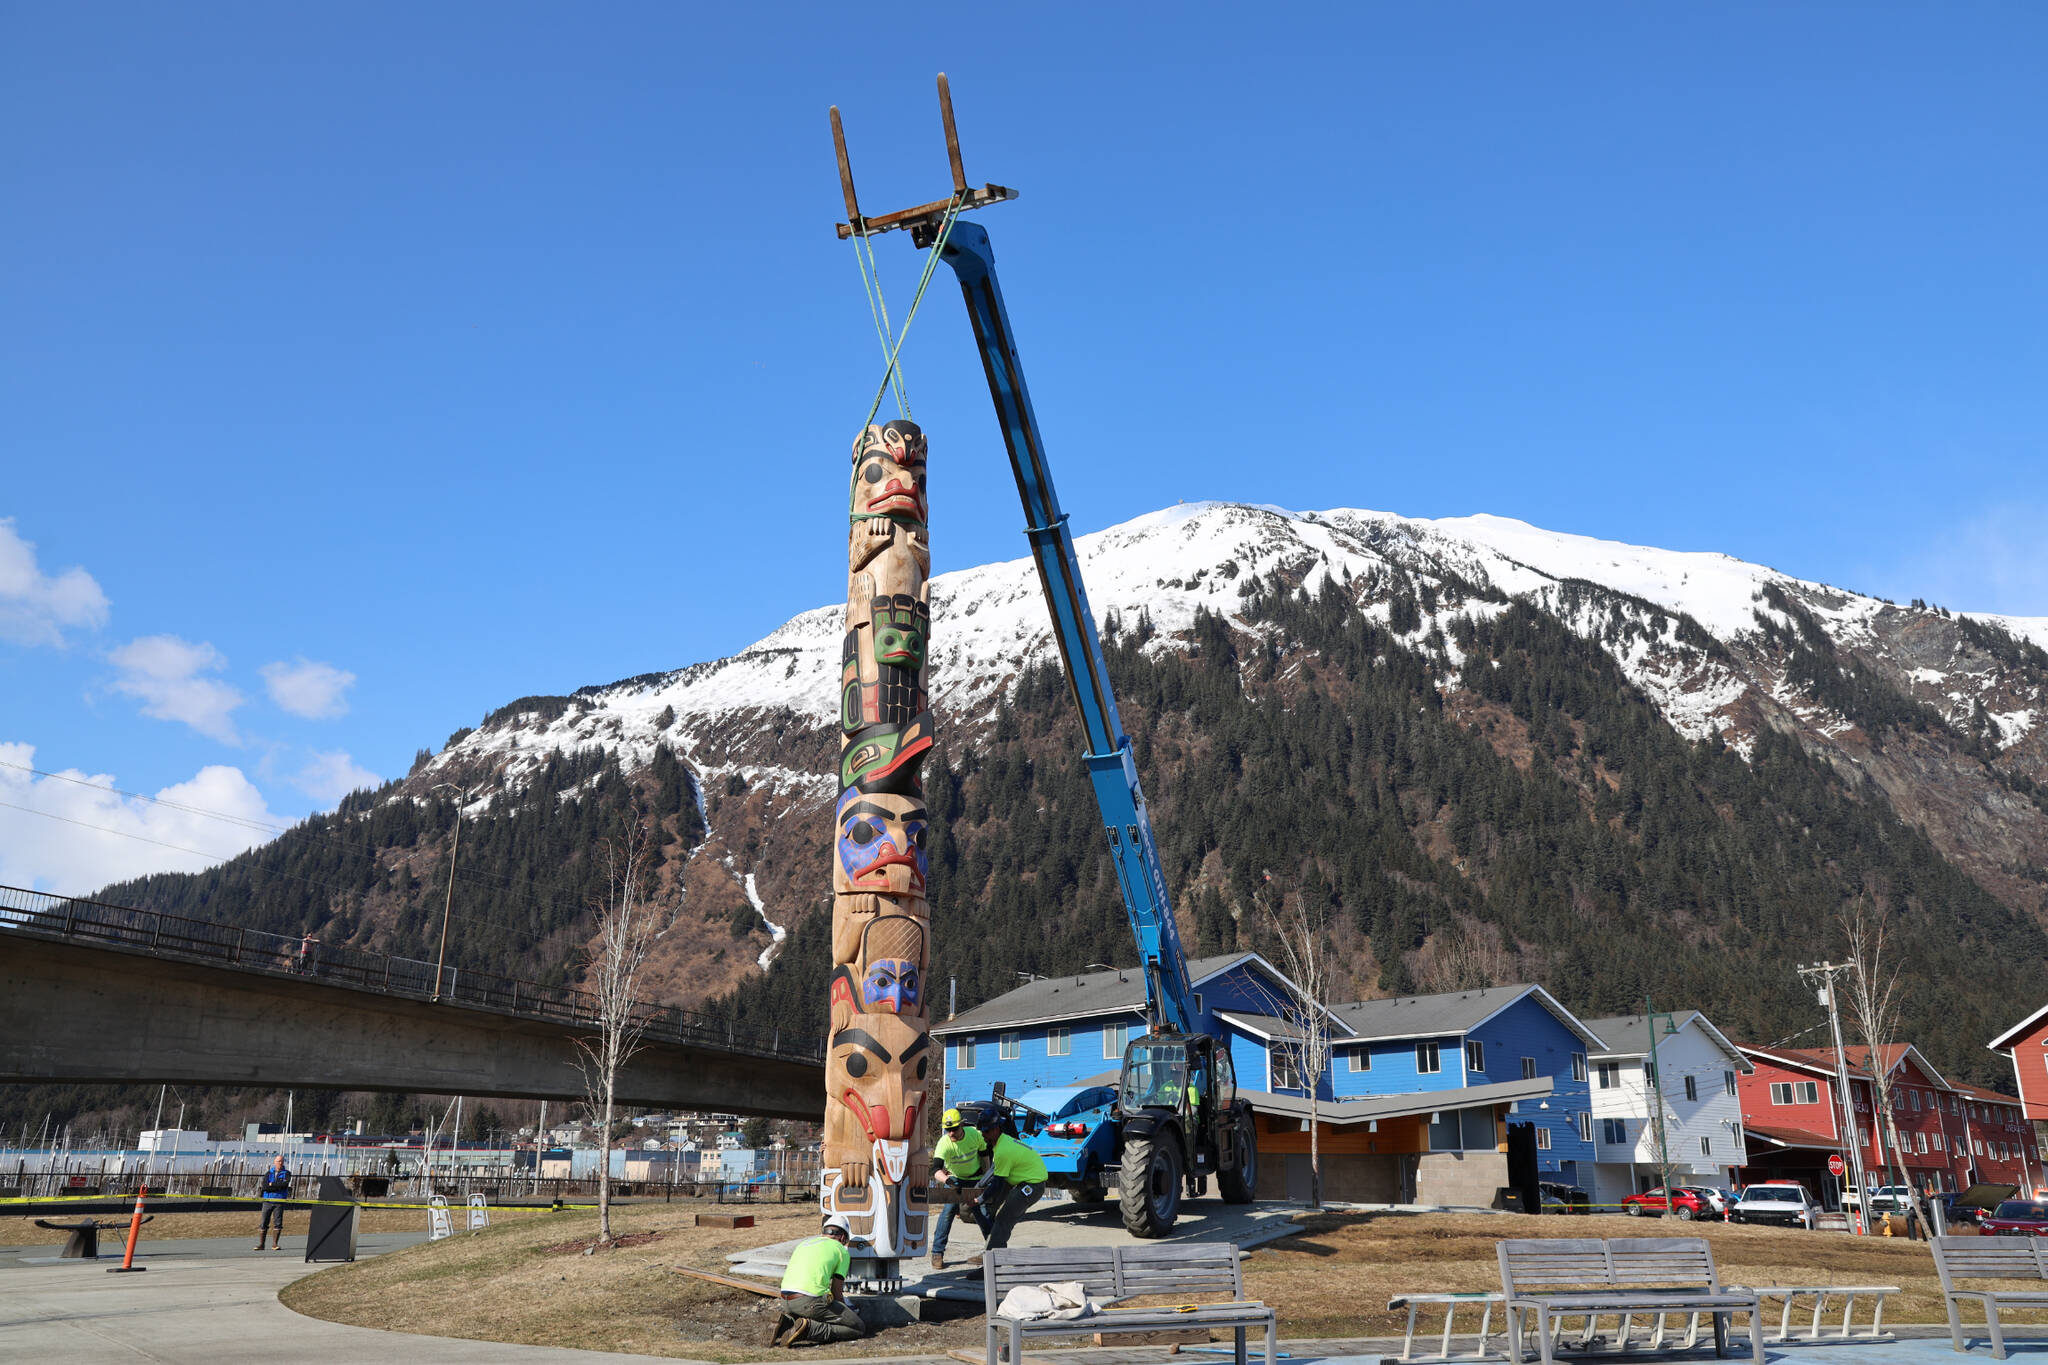 A crane slowly raises a totem pole by Tsimshian carver Gyibaawm Laxha David Robert Boxley at Overstreet Park Sunday afternoon. The pole is one of the first 12 of 30 totem poles to be raised to create a Kootéeyaa Deiyí (totem pole trail) lining the waterfront in Juneau. (Clarise Larson / Juneau Empire)